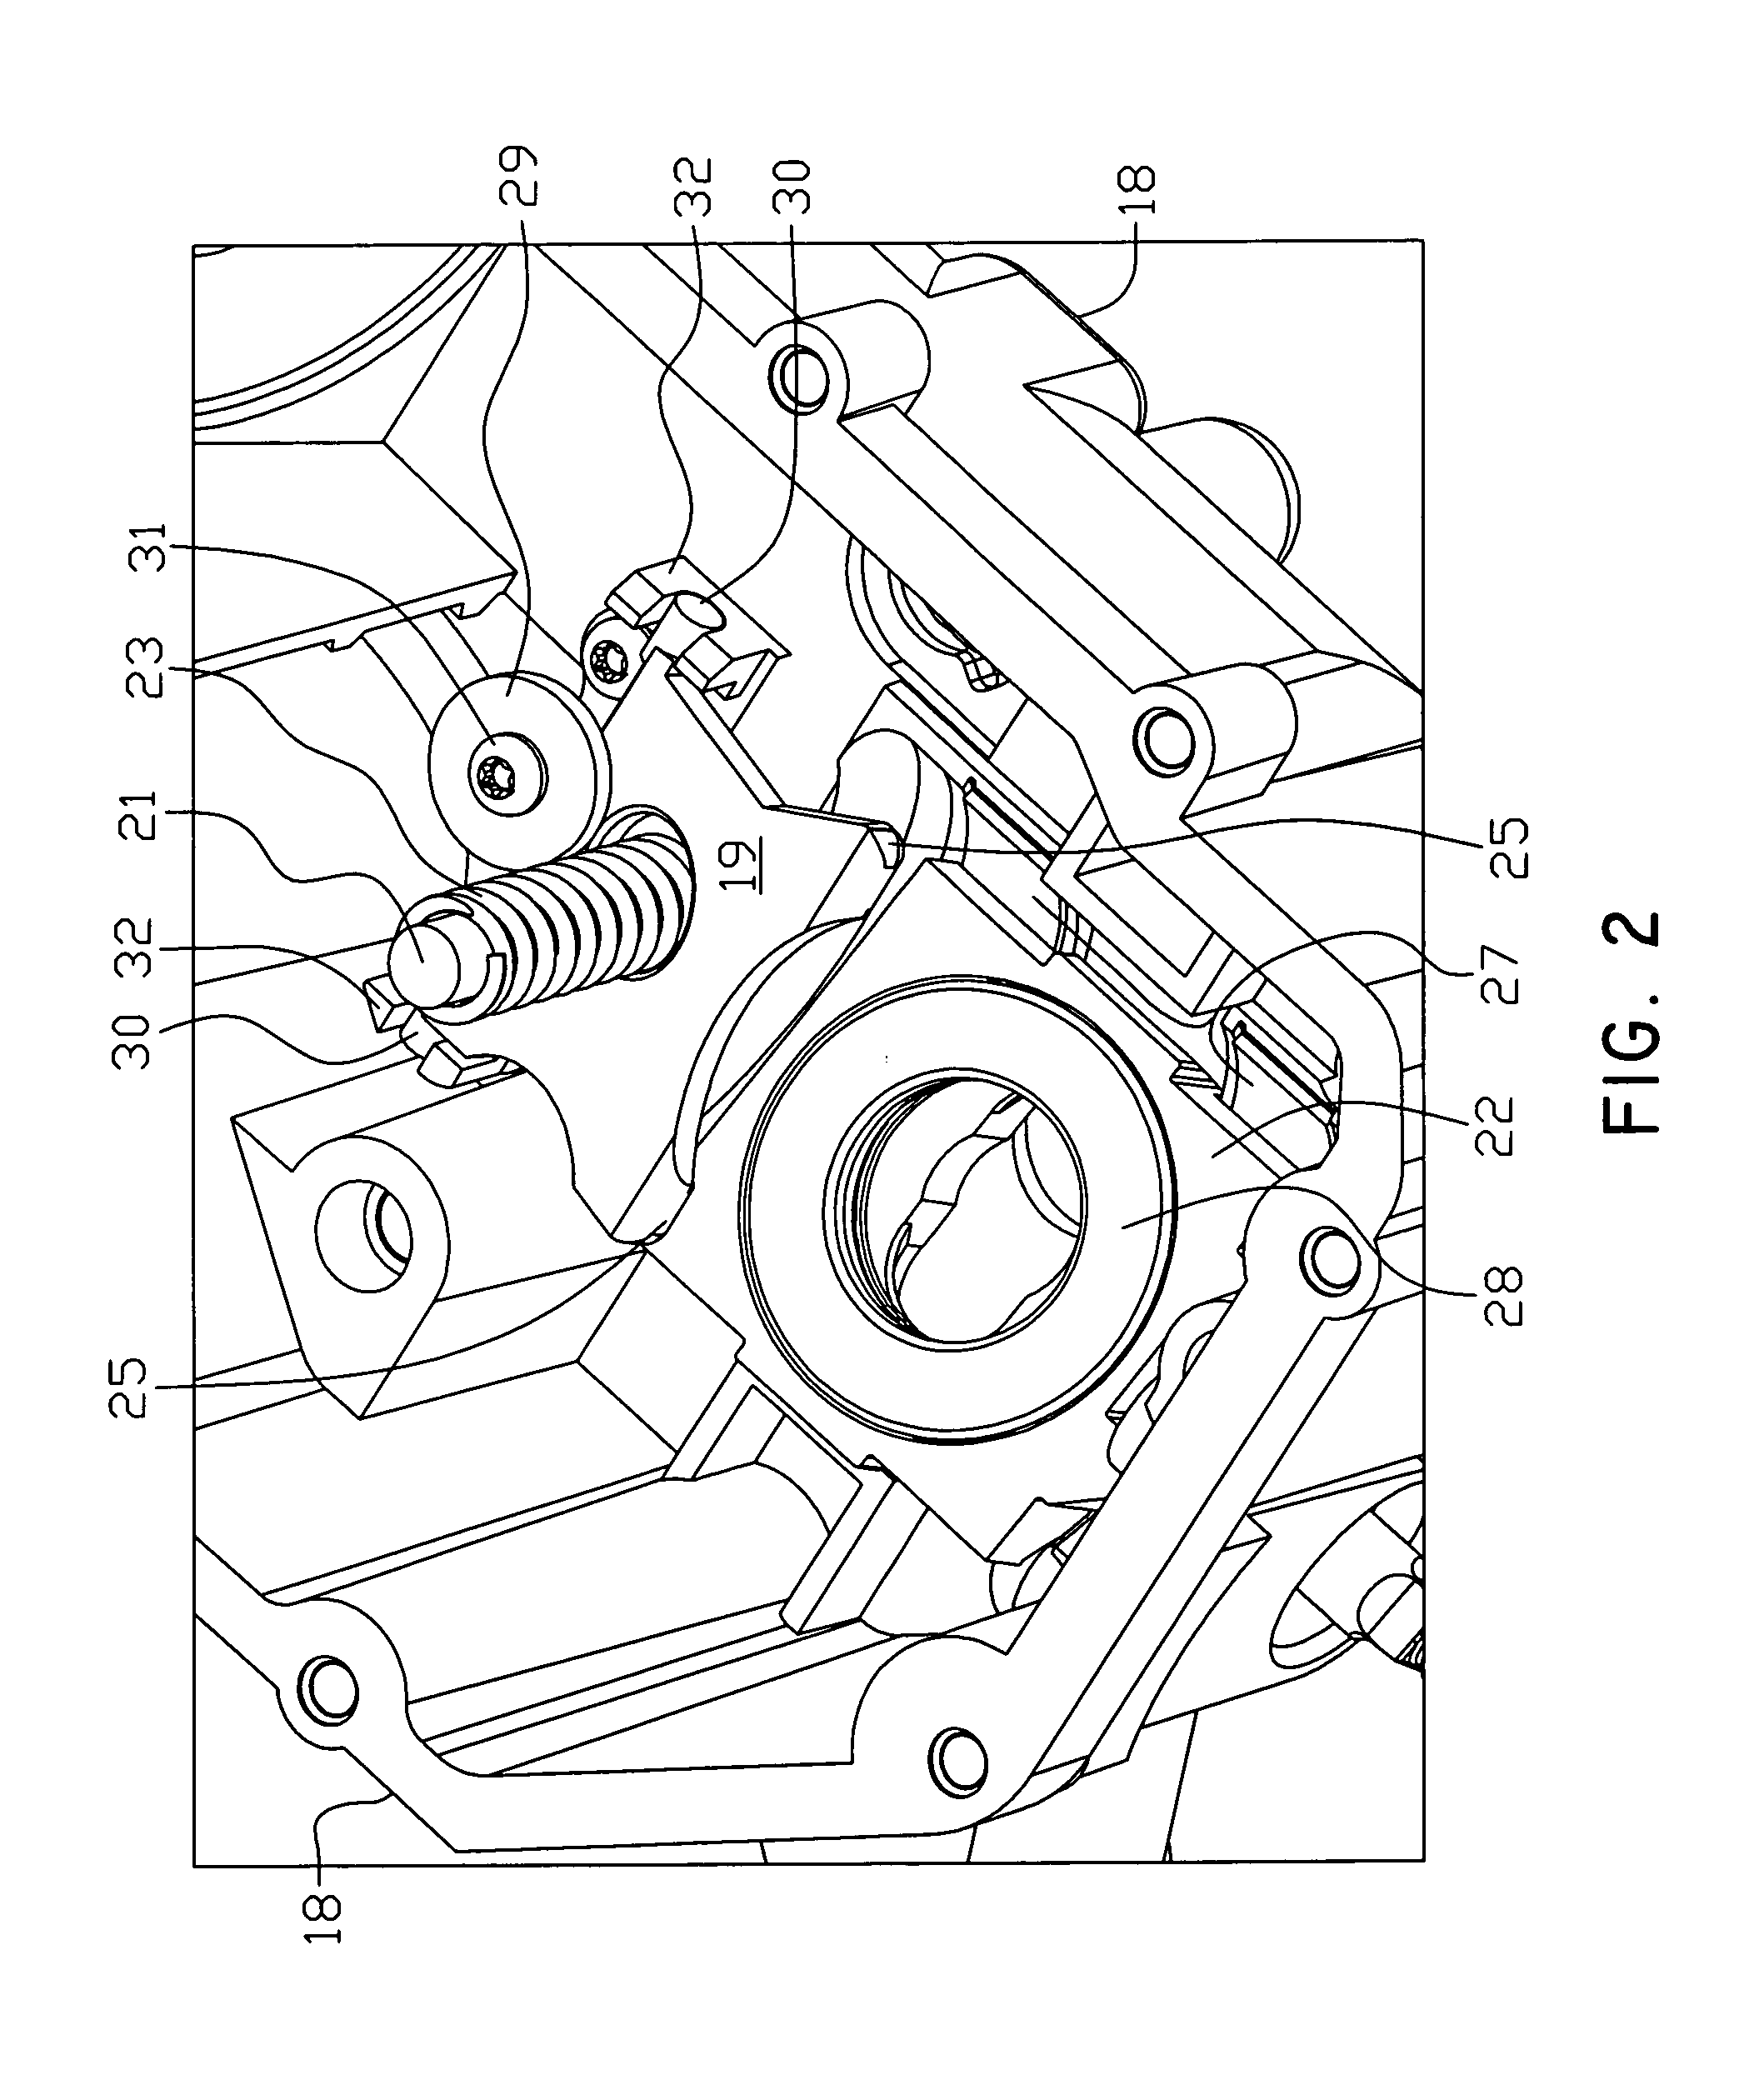 Return to neutral device for a hydraulic apparatus